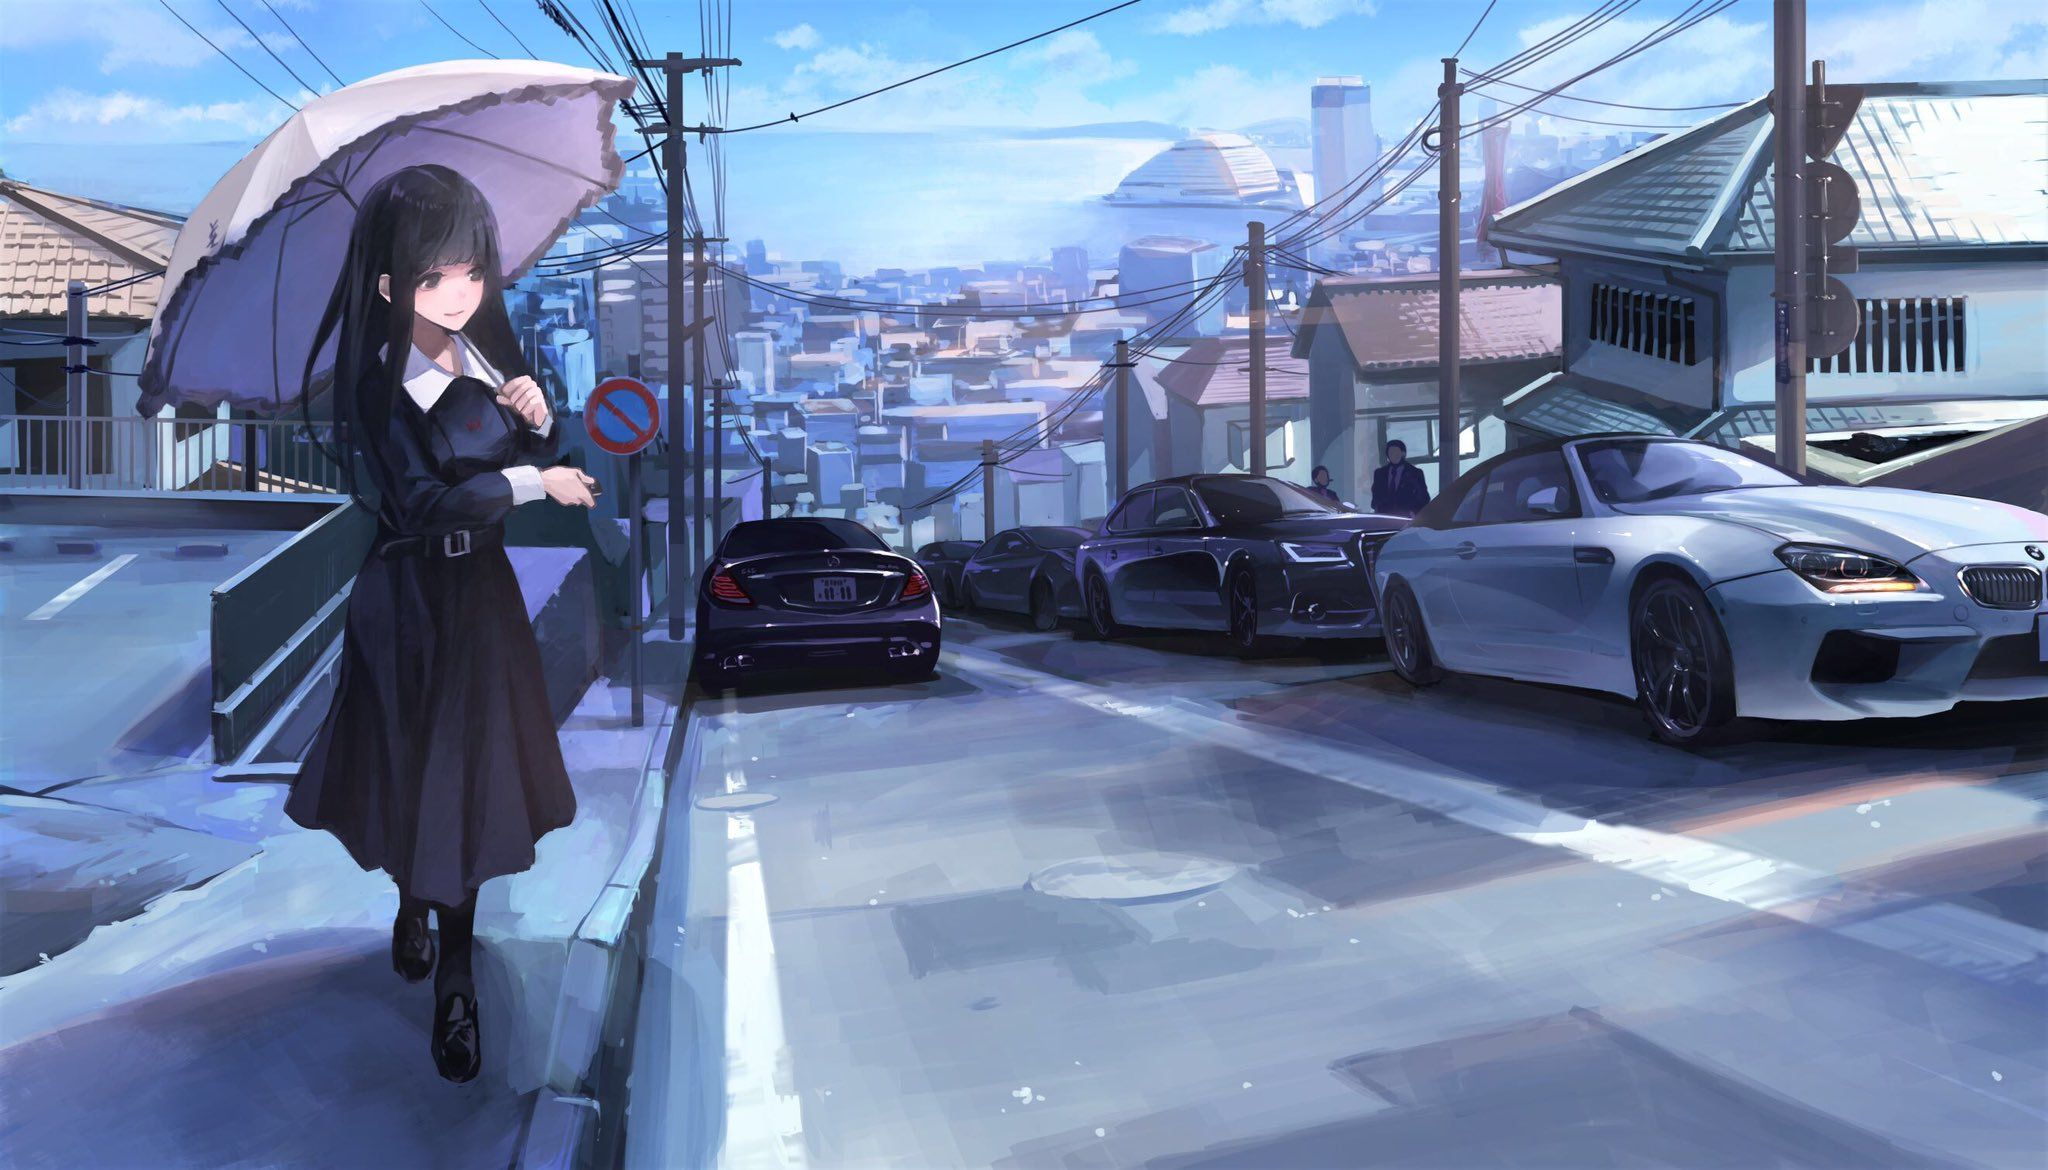 Small dump of anime girls (and boy) with cars wallpaper